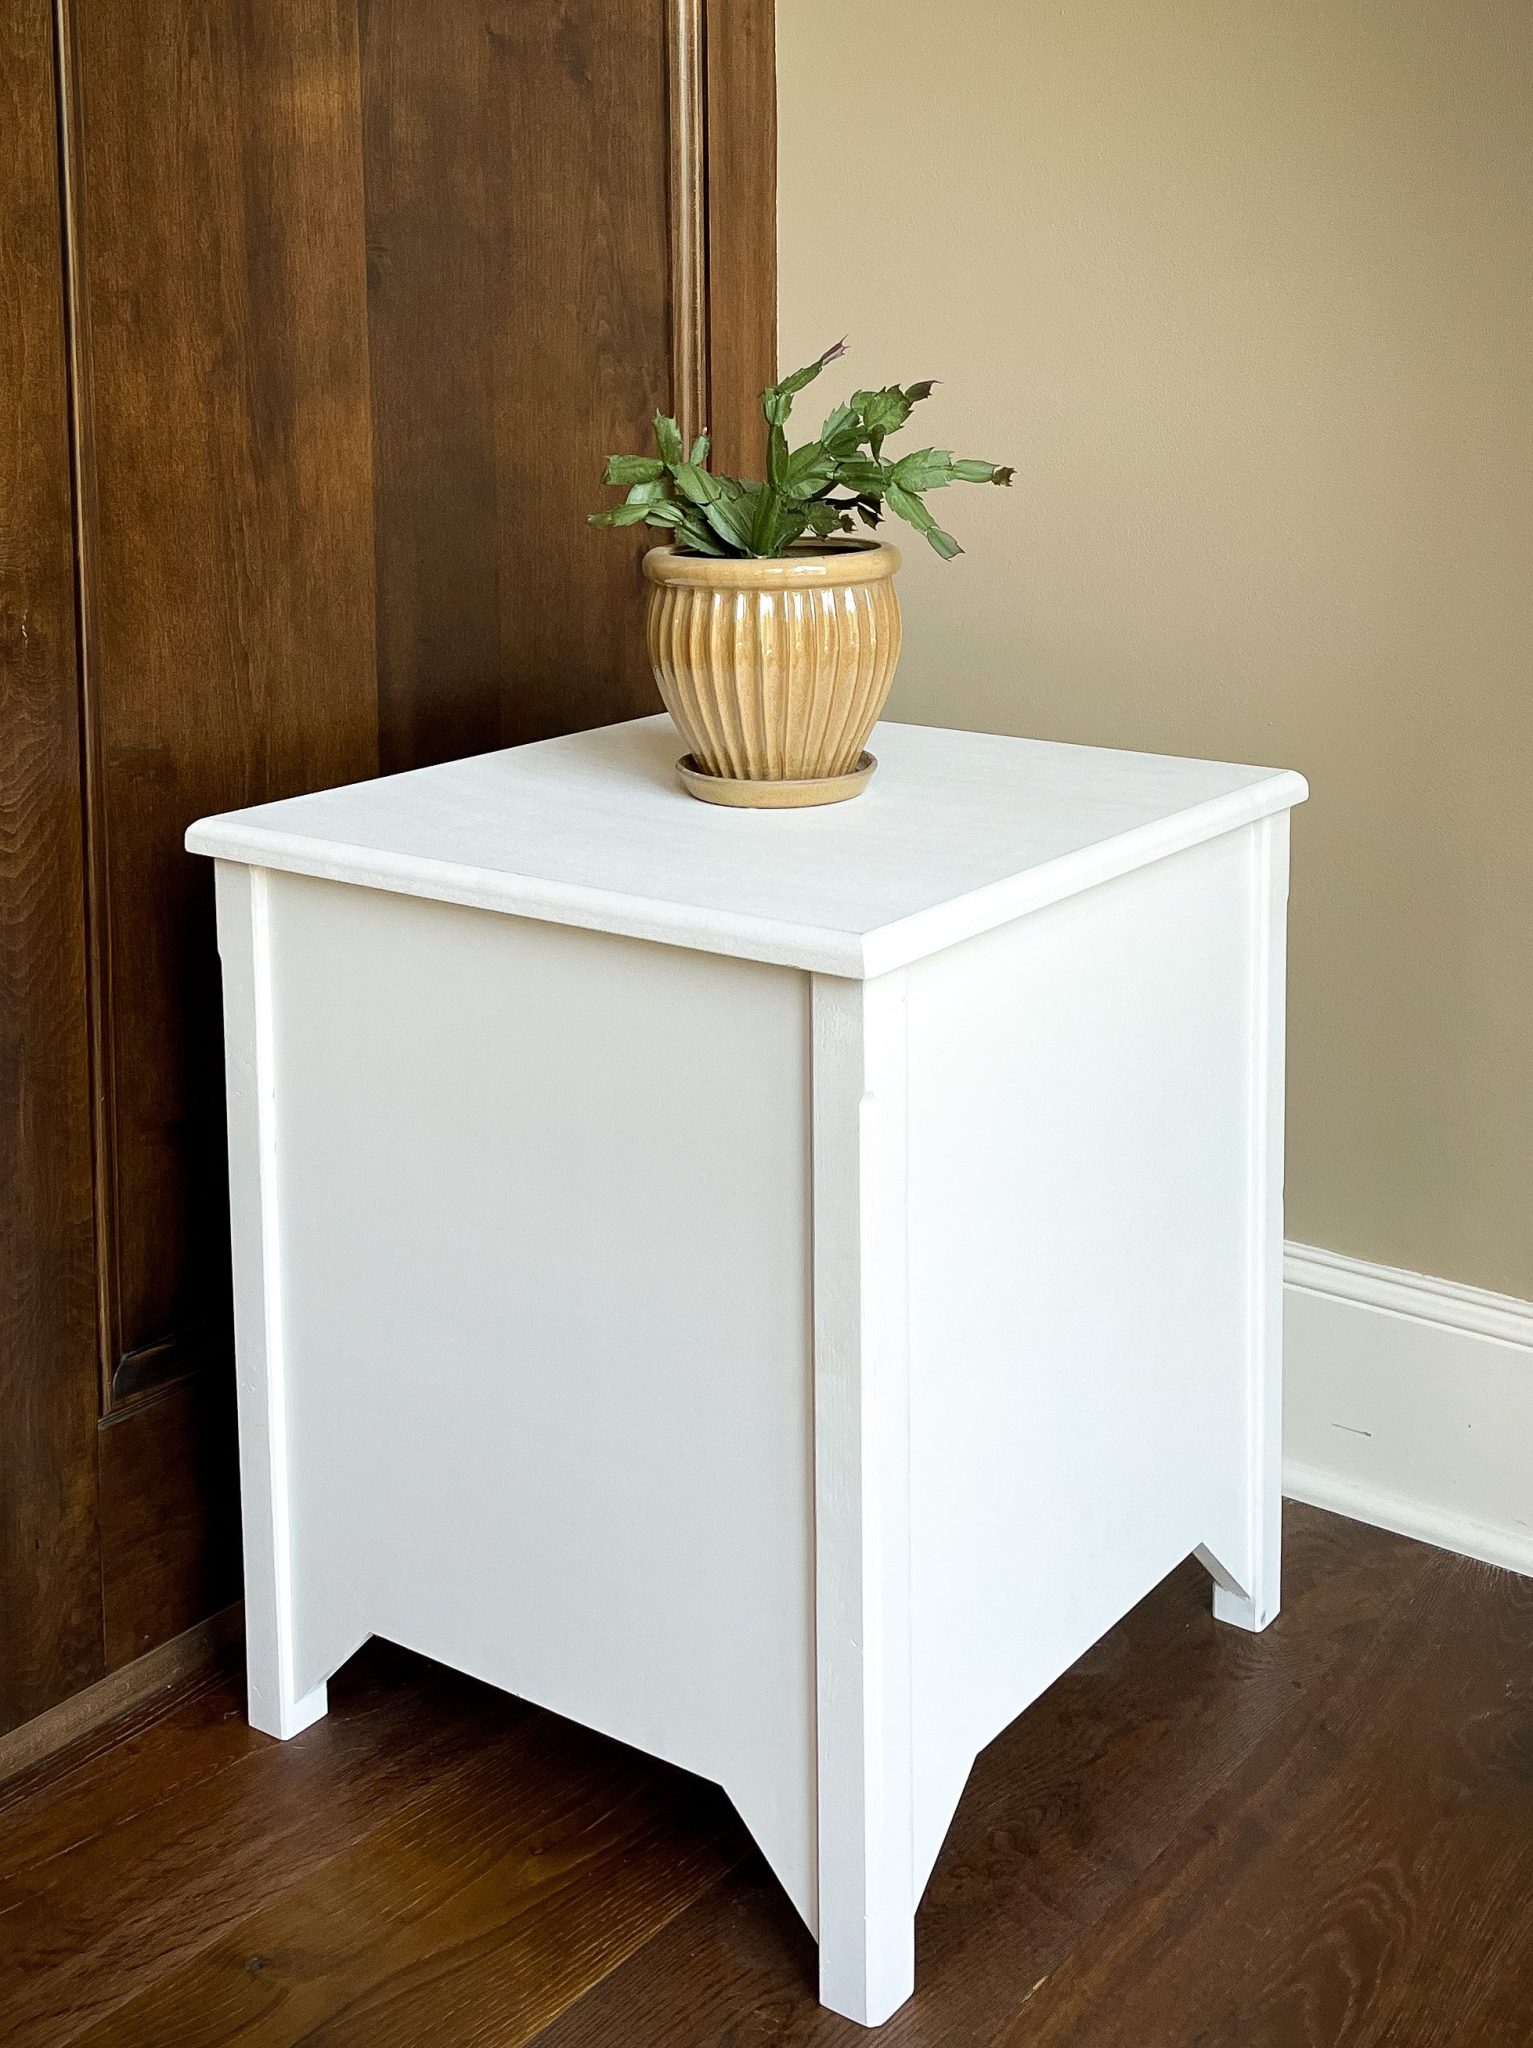 A sleek white painted Rumblewood X12 Subwoofer with a plant centered on the top